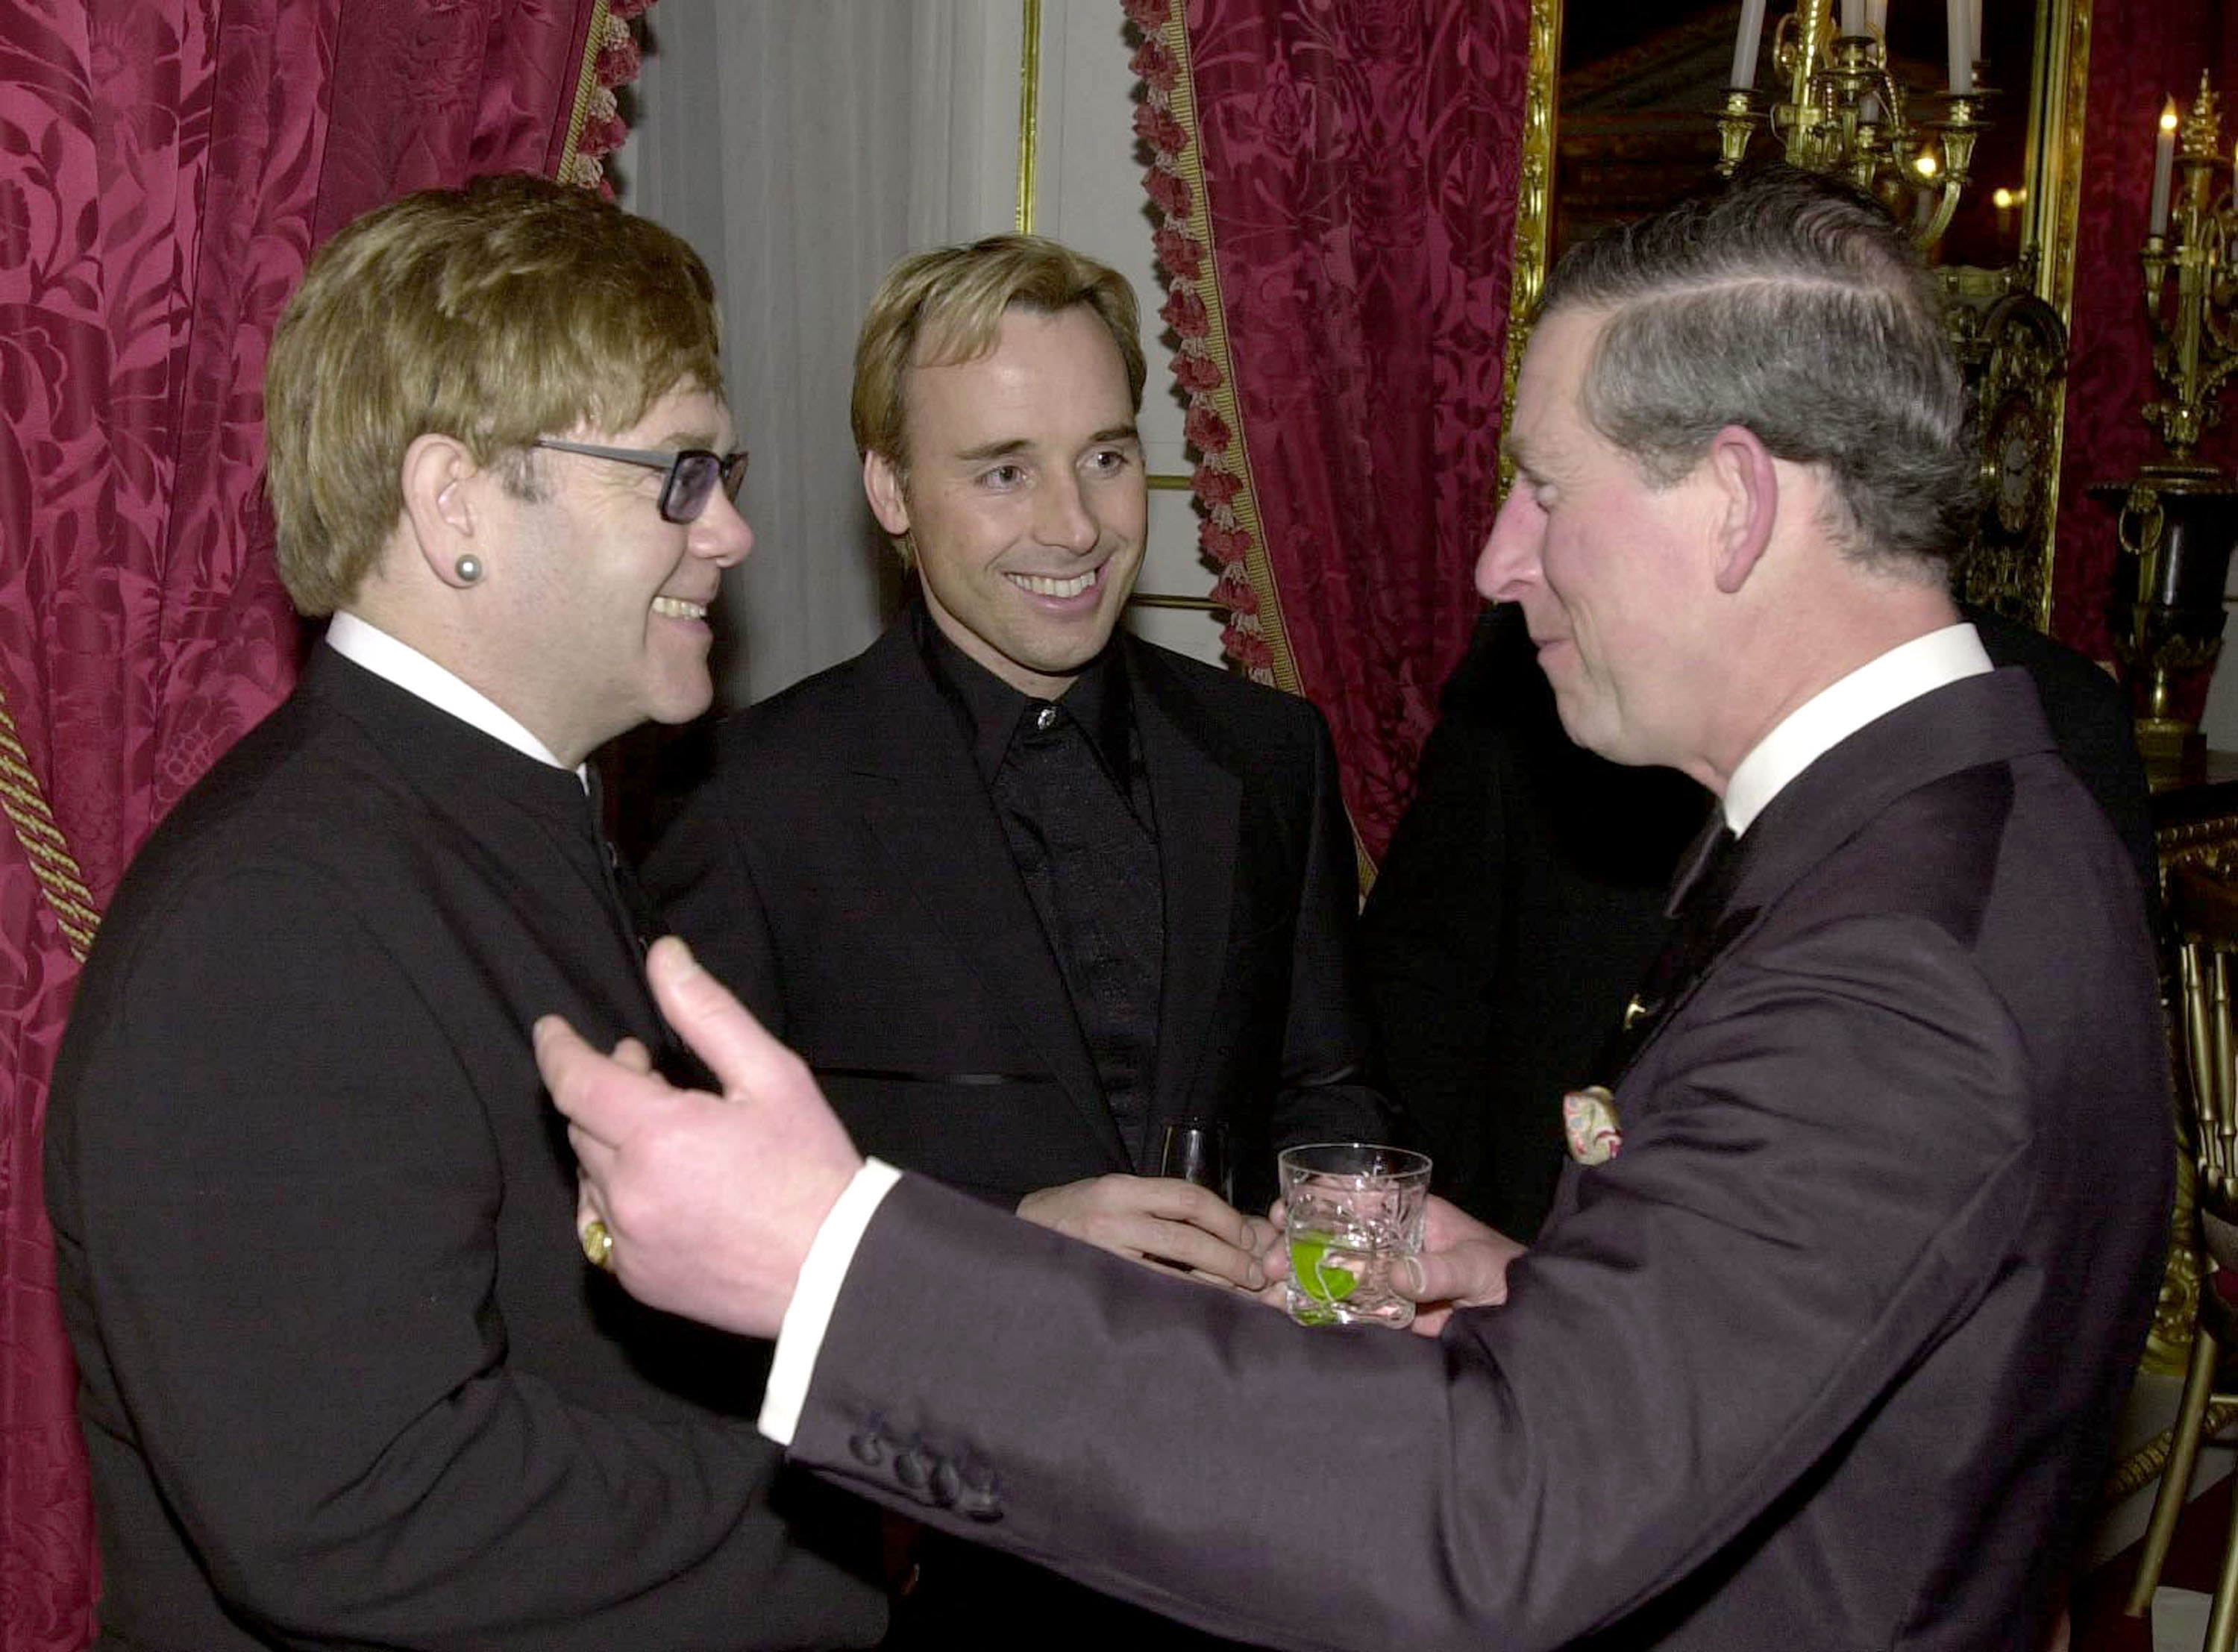 Elton and Charles smiling at each other